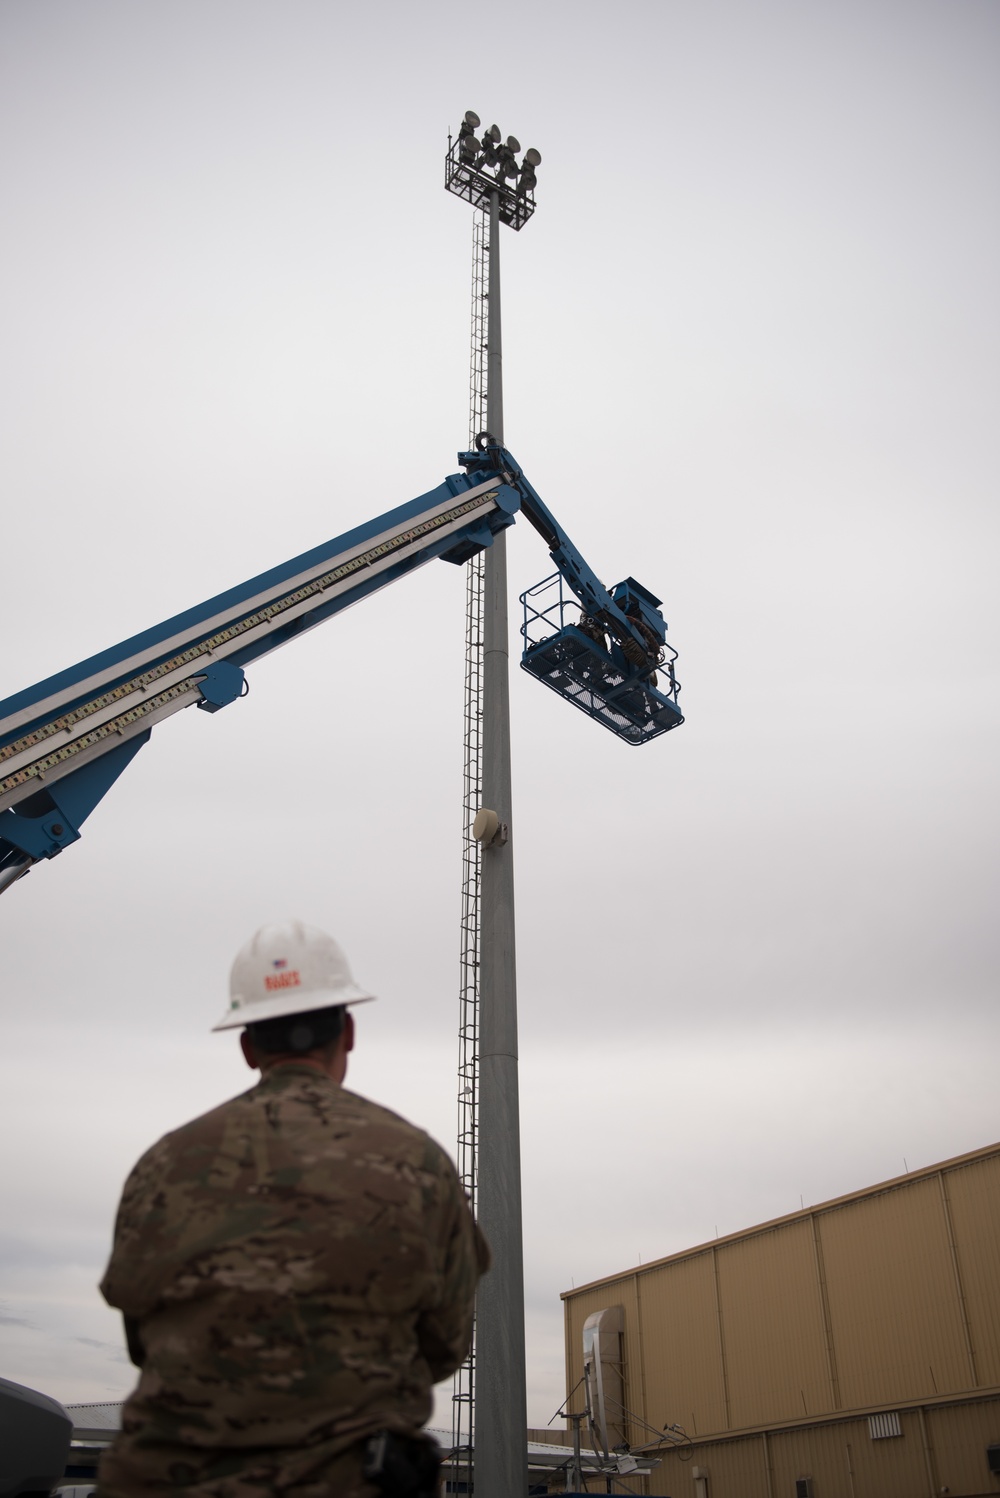 Don’t look down: Engineers go to great heights to fix infrastructure, airfield